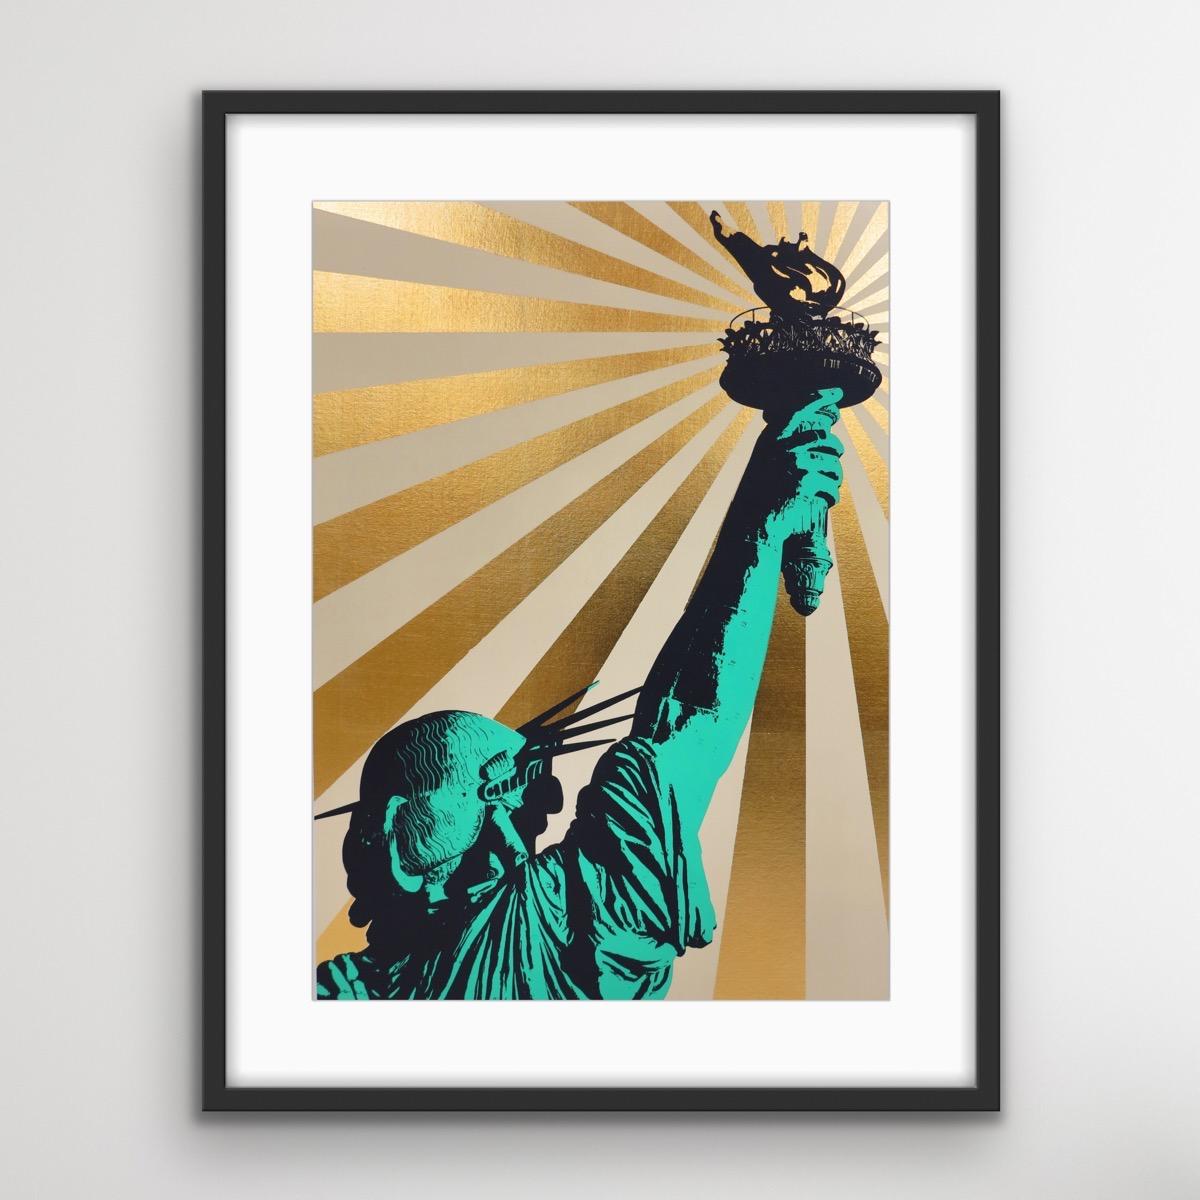 Sweet Land of Liberty, New York Art, Statue of Liberty Artwork, Iconic Art - Contemporary Print by Jayson Lilley